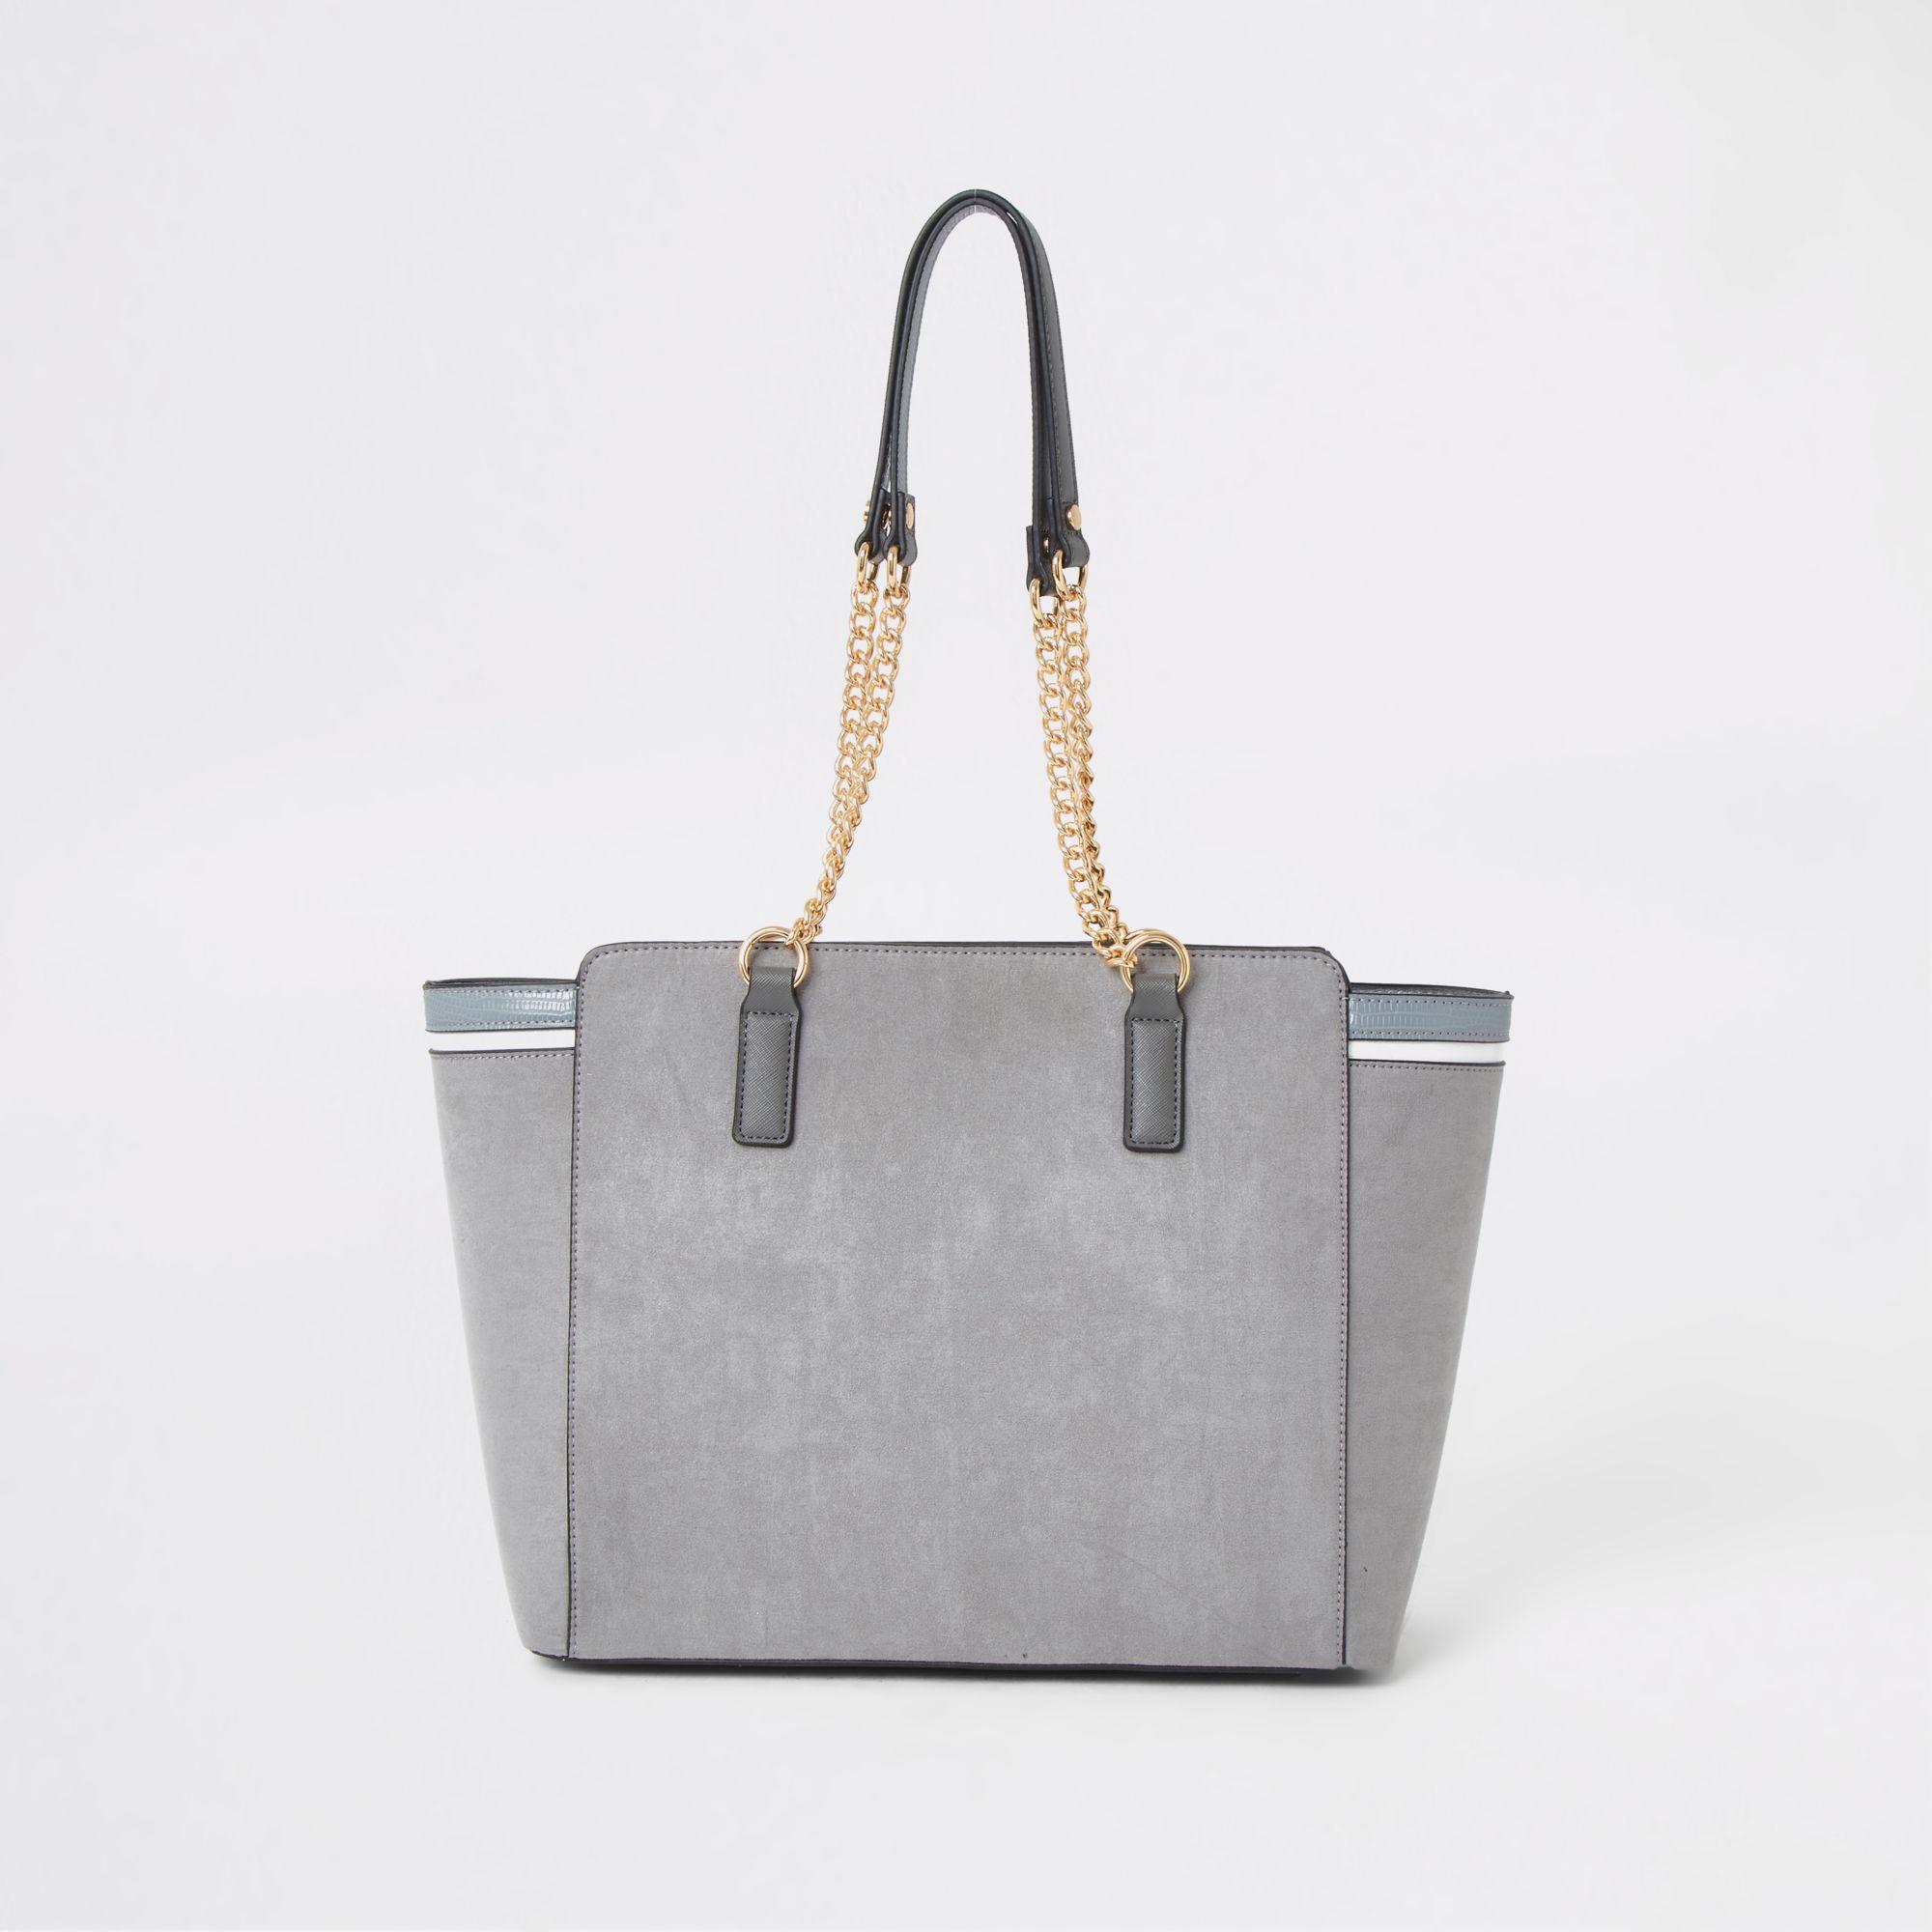 River Island Grey Chain Front Winged Tote Bag in Grey | Lyst Canada